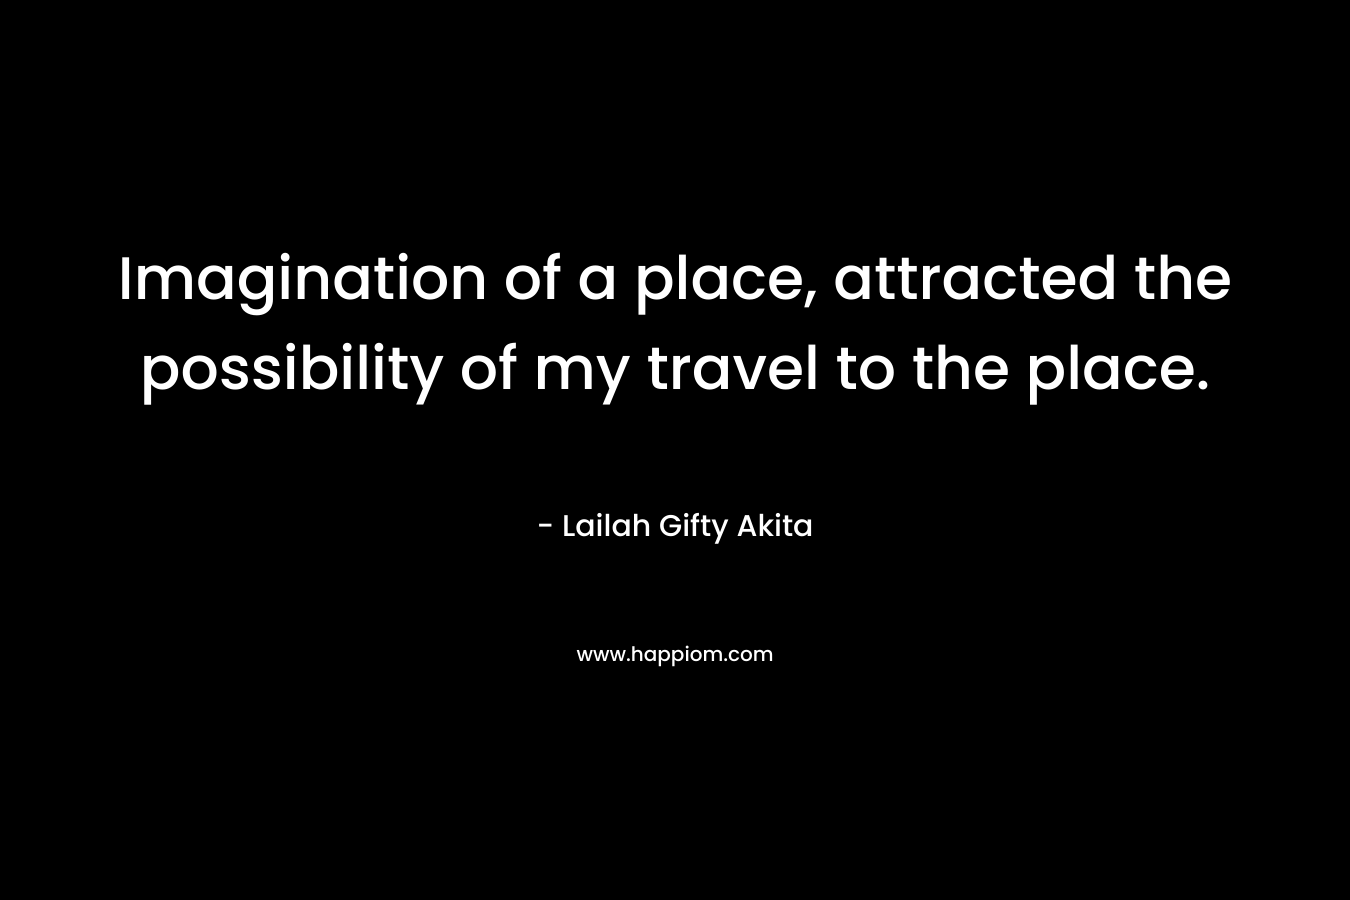 Imagination of a place, attracted the possibility of my travel to the place.